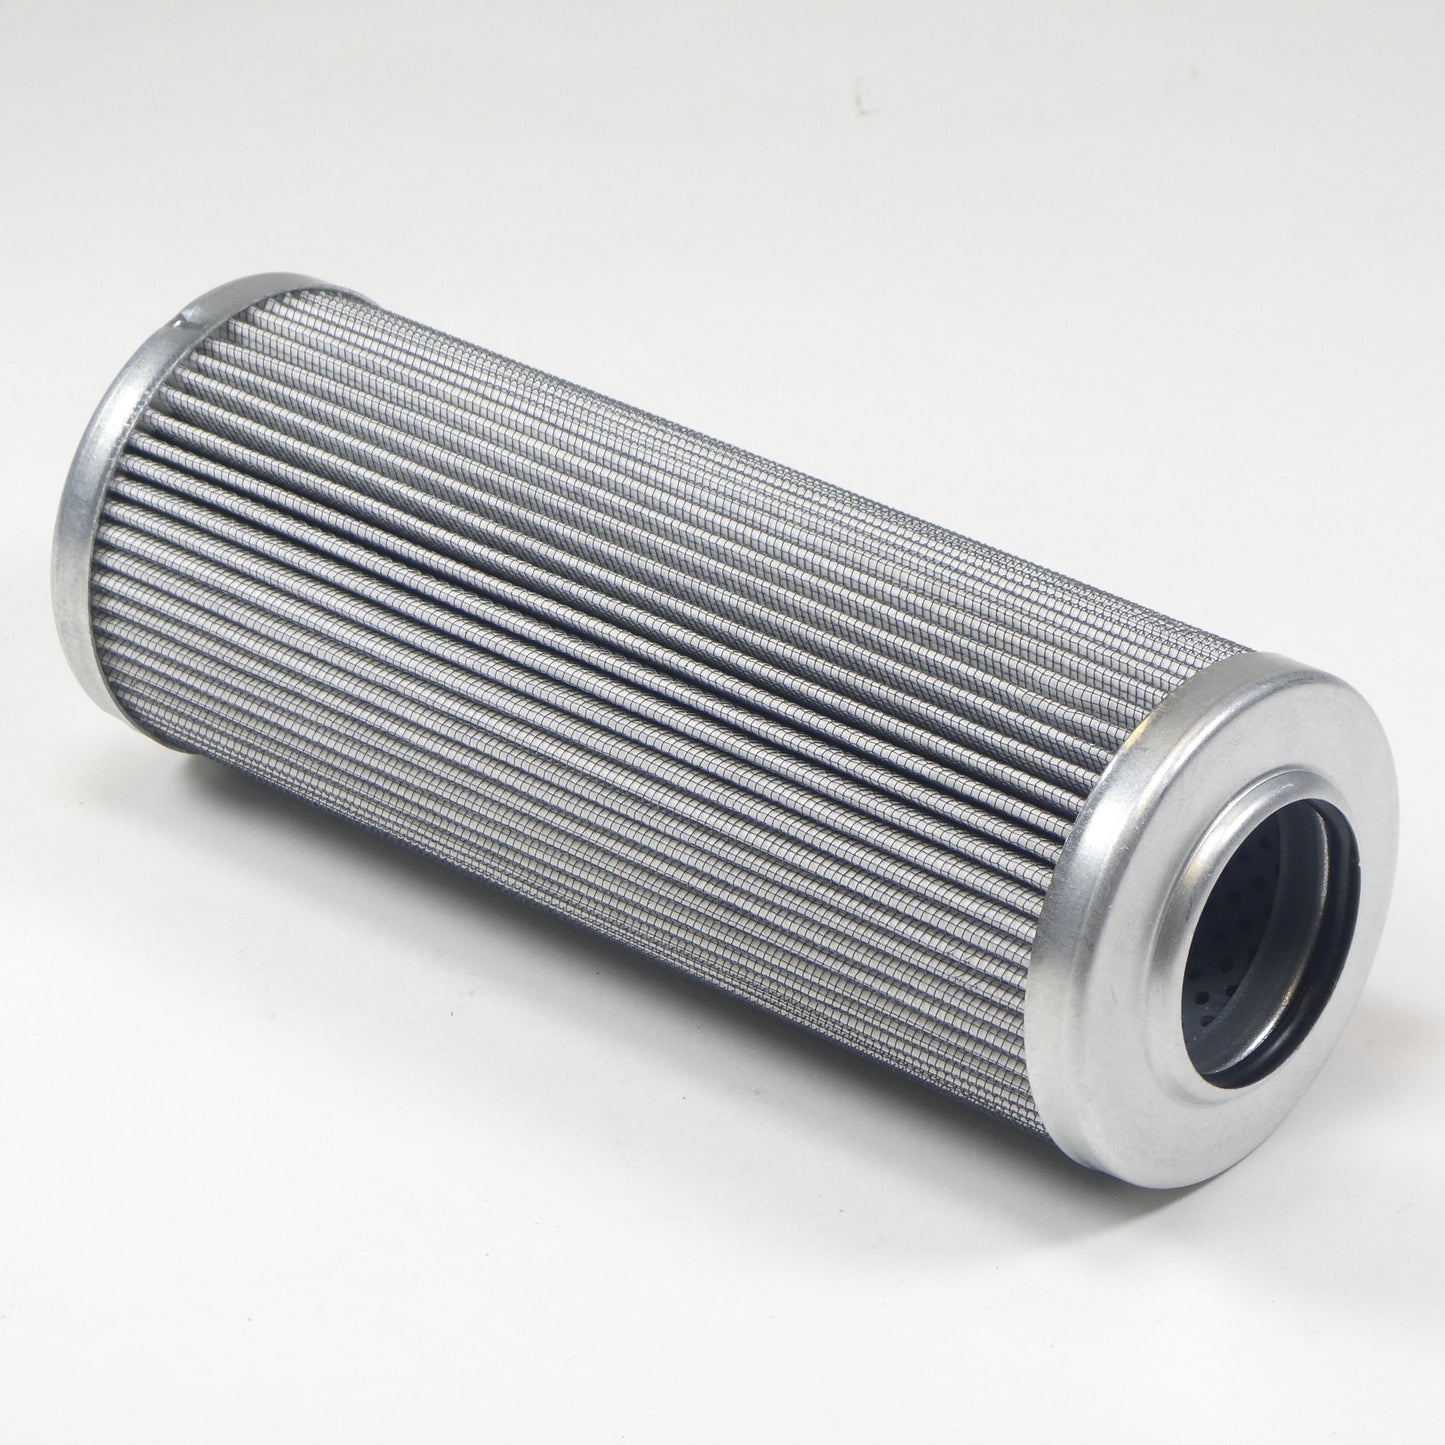 Hydrafil Replacement Filter Element for Hydac H-9600/8-020BN3-V